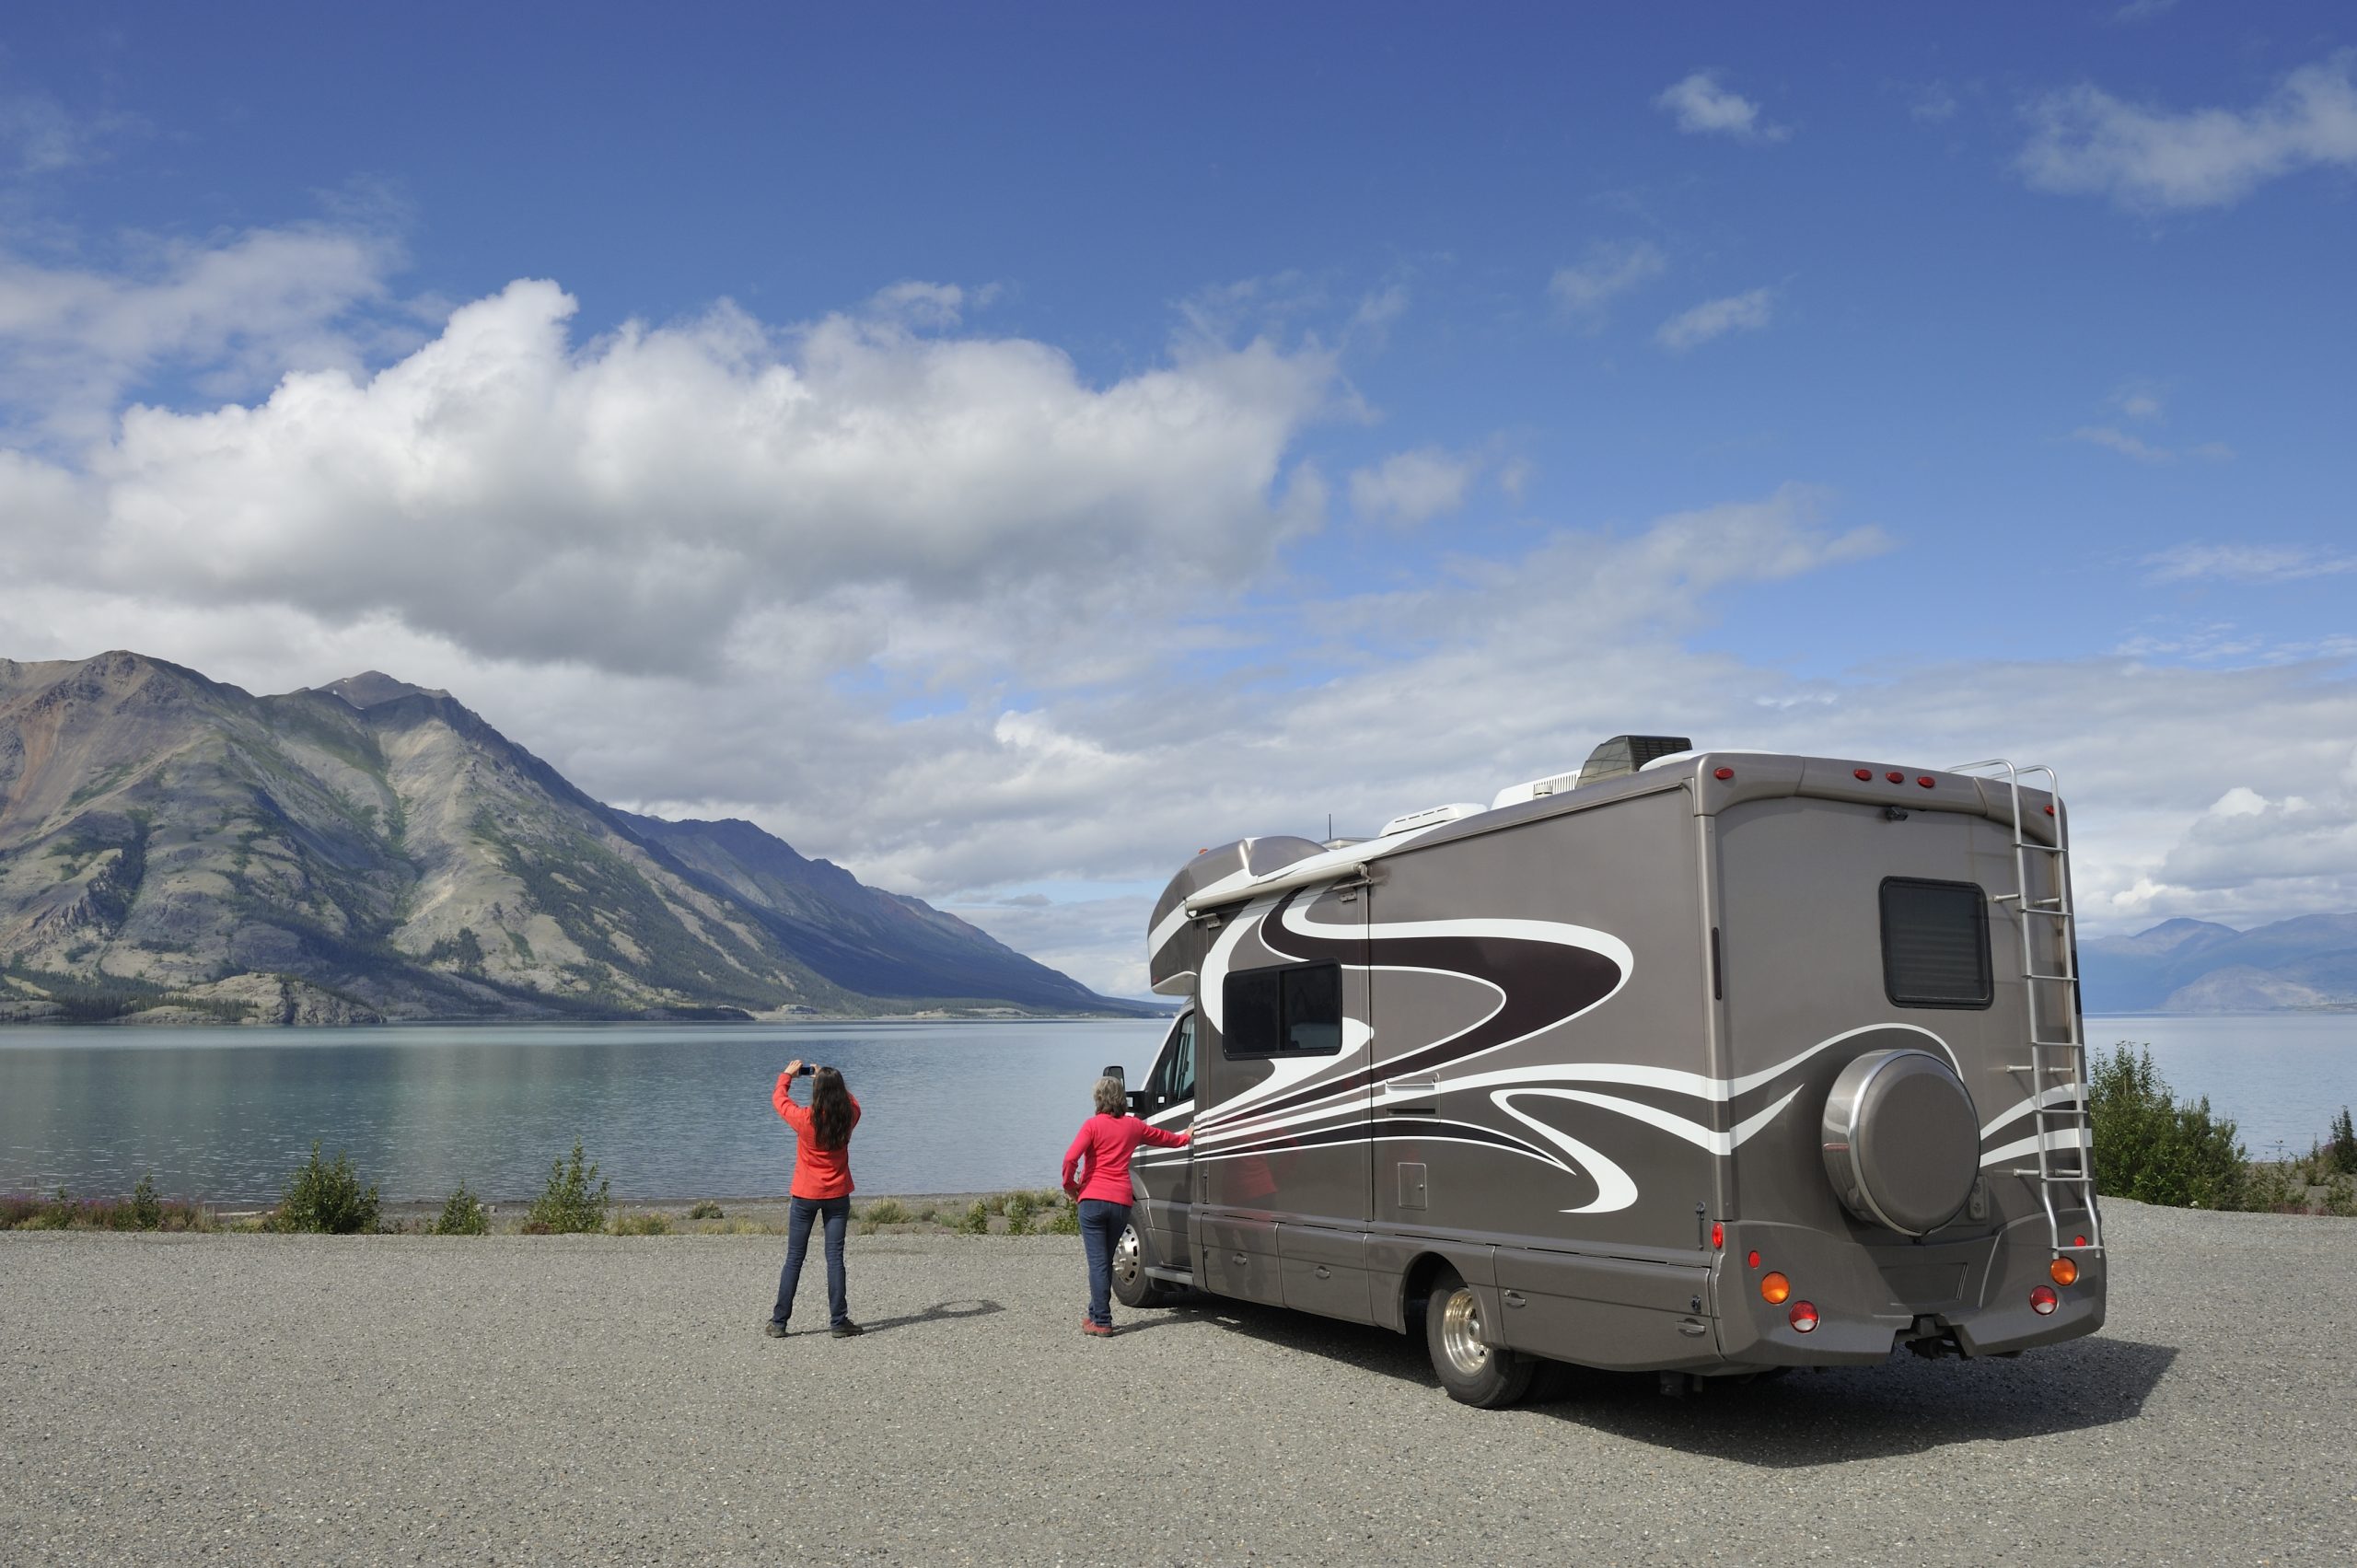 Top tips for planning a successful RV trip